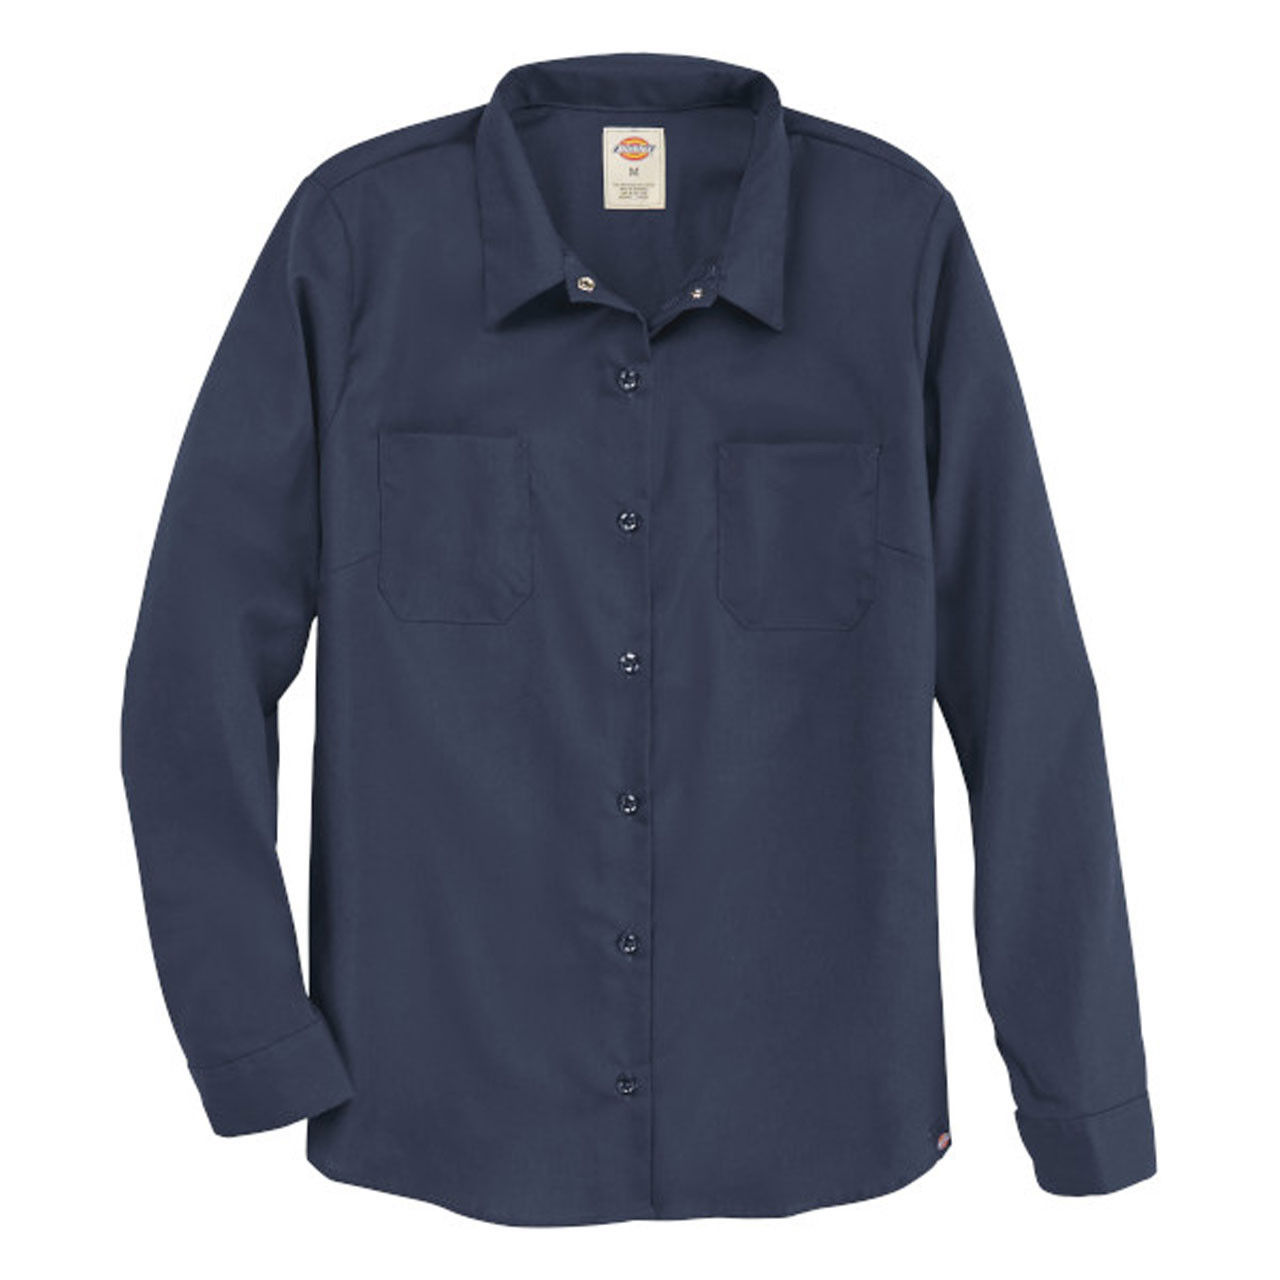 Is this dickie long sleeve shirt designed for women?